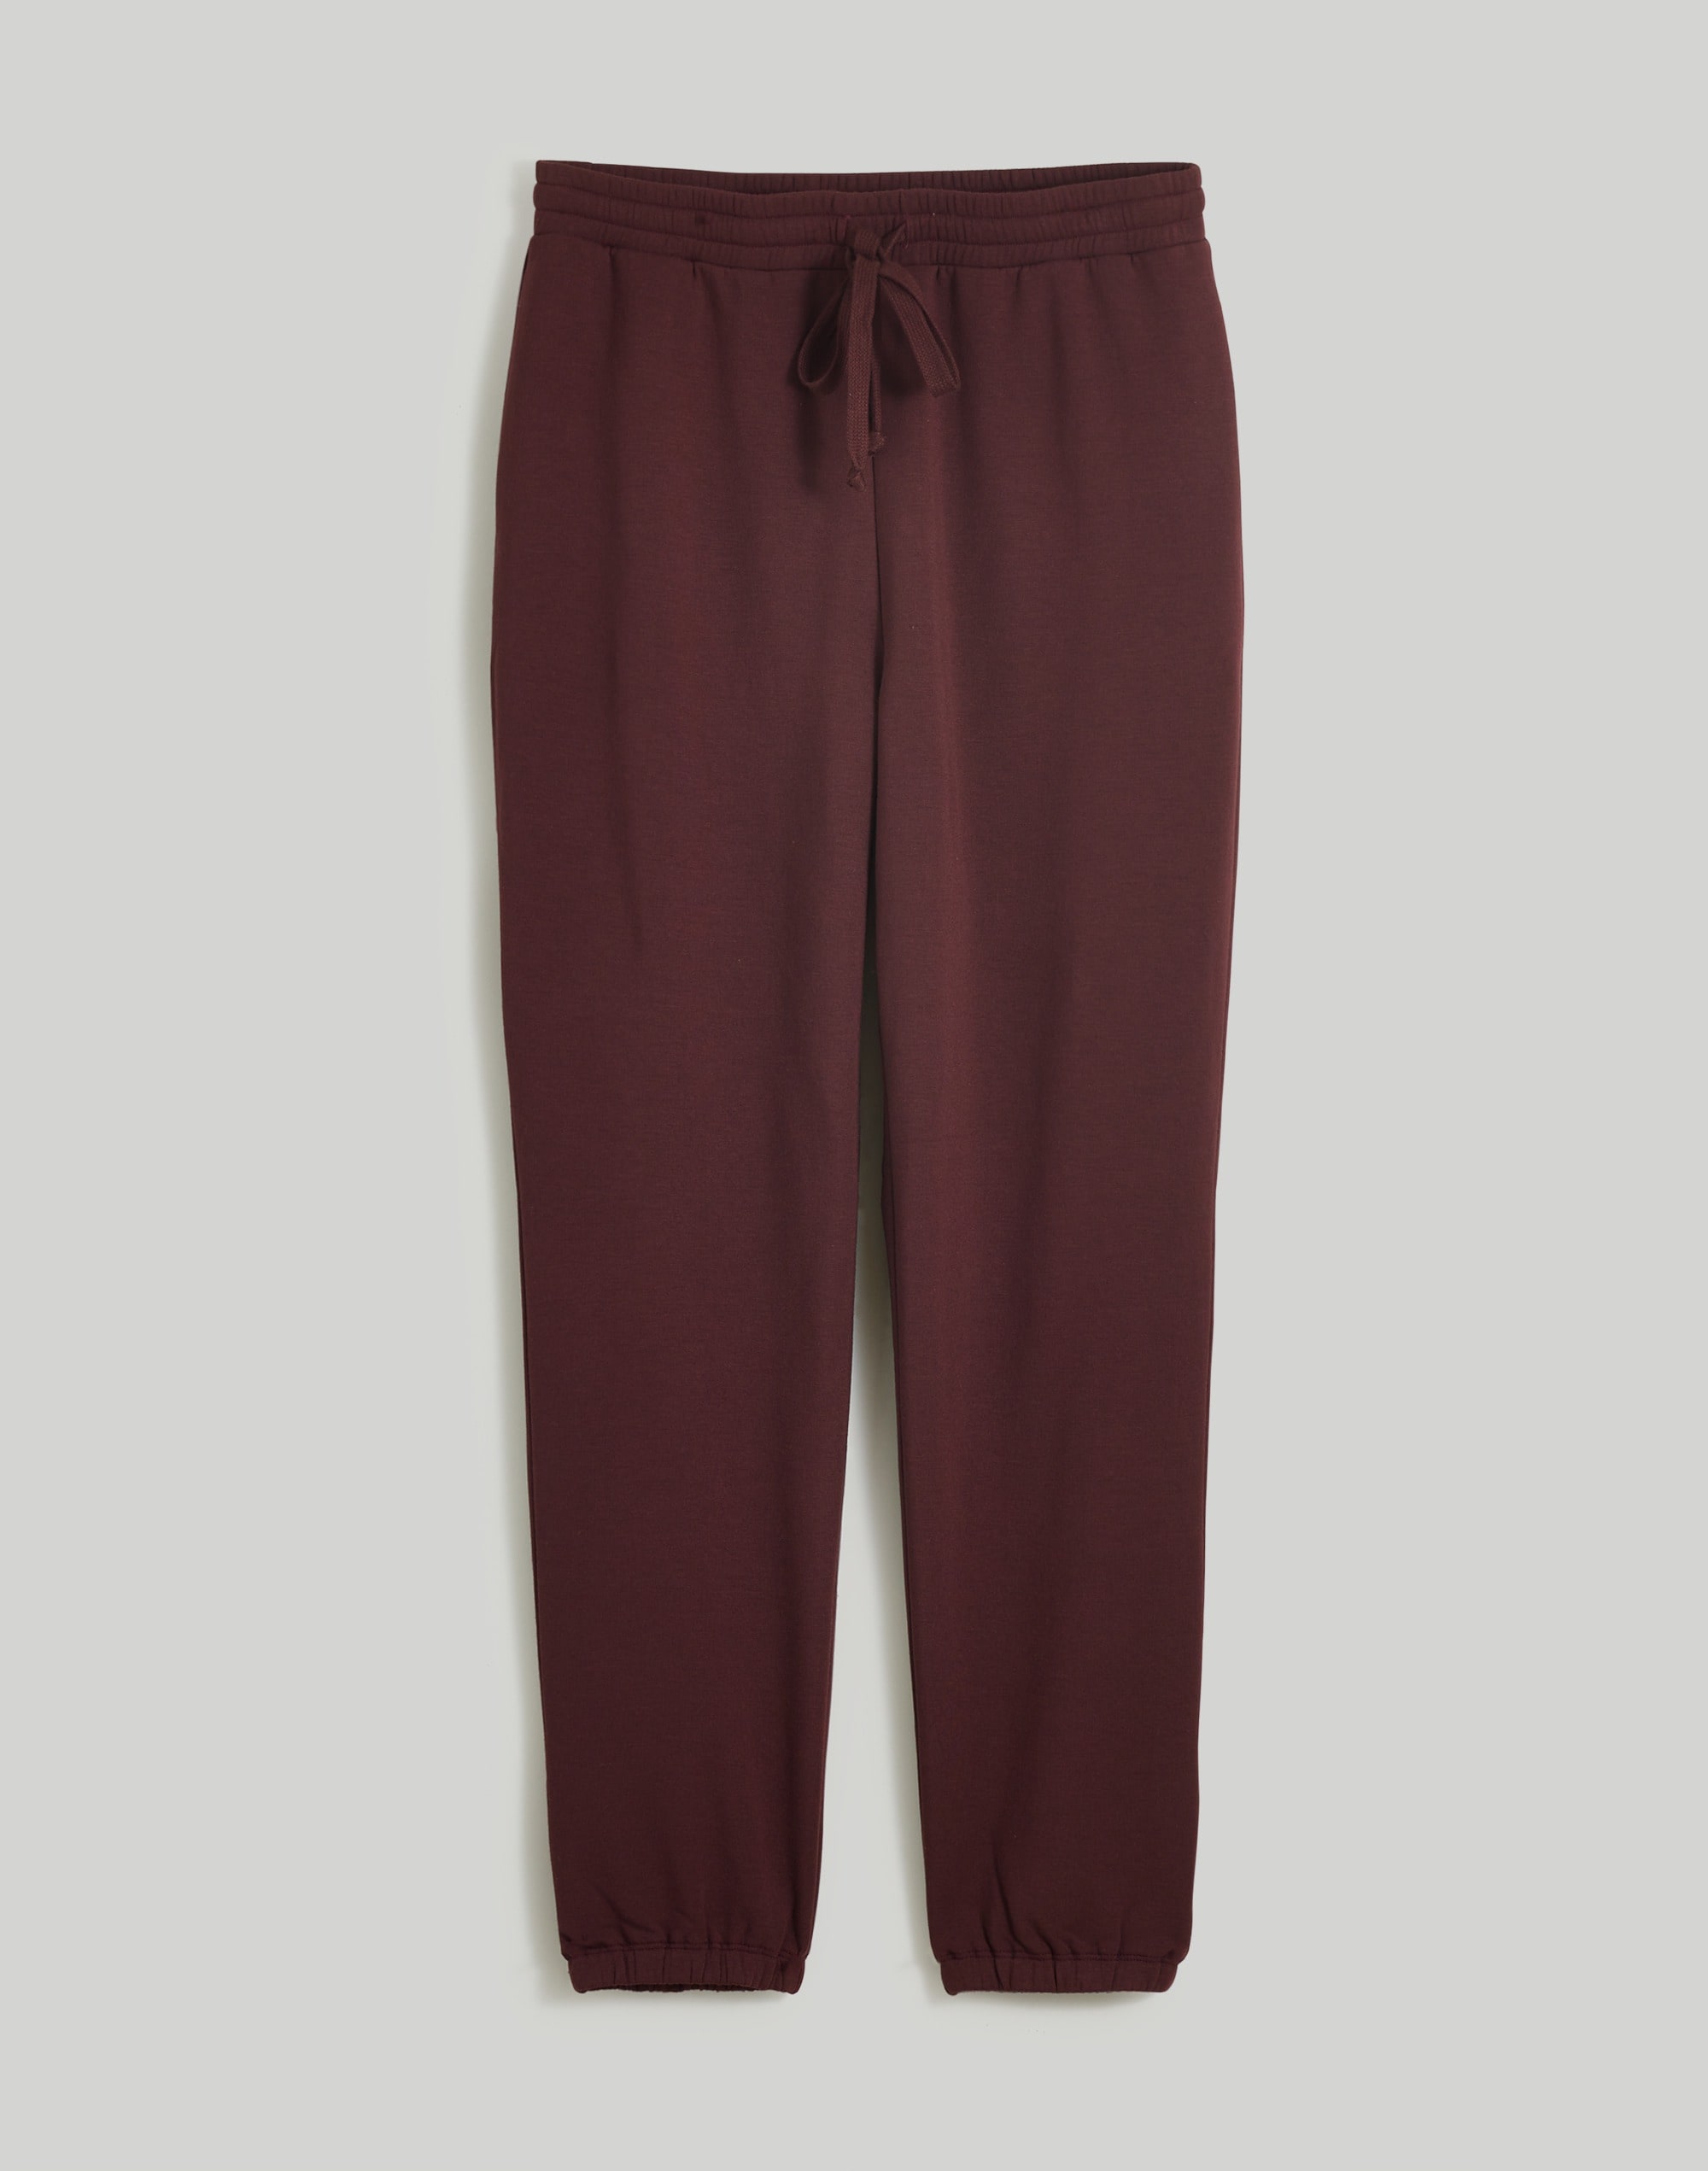 Mw Plus Superbrushed Easygoing Sweatpants In Chocolate Raisin